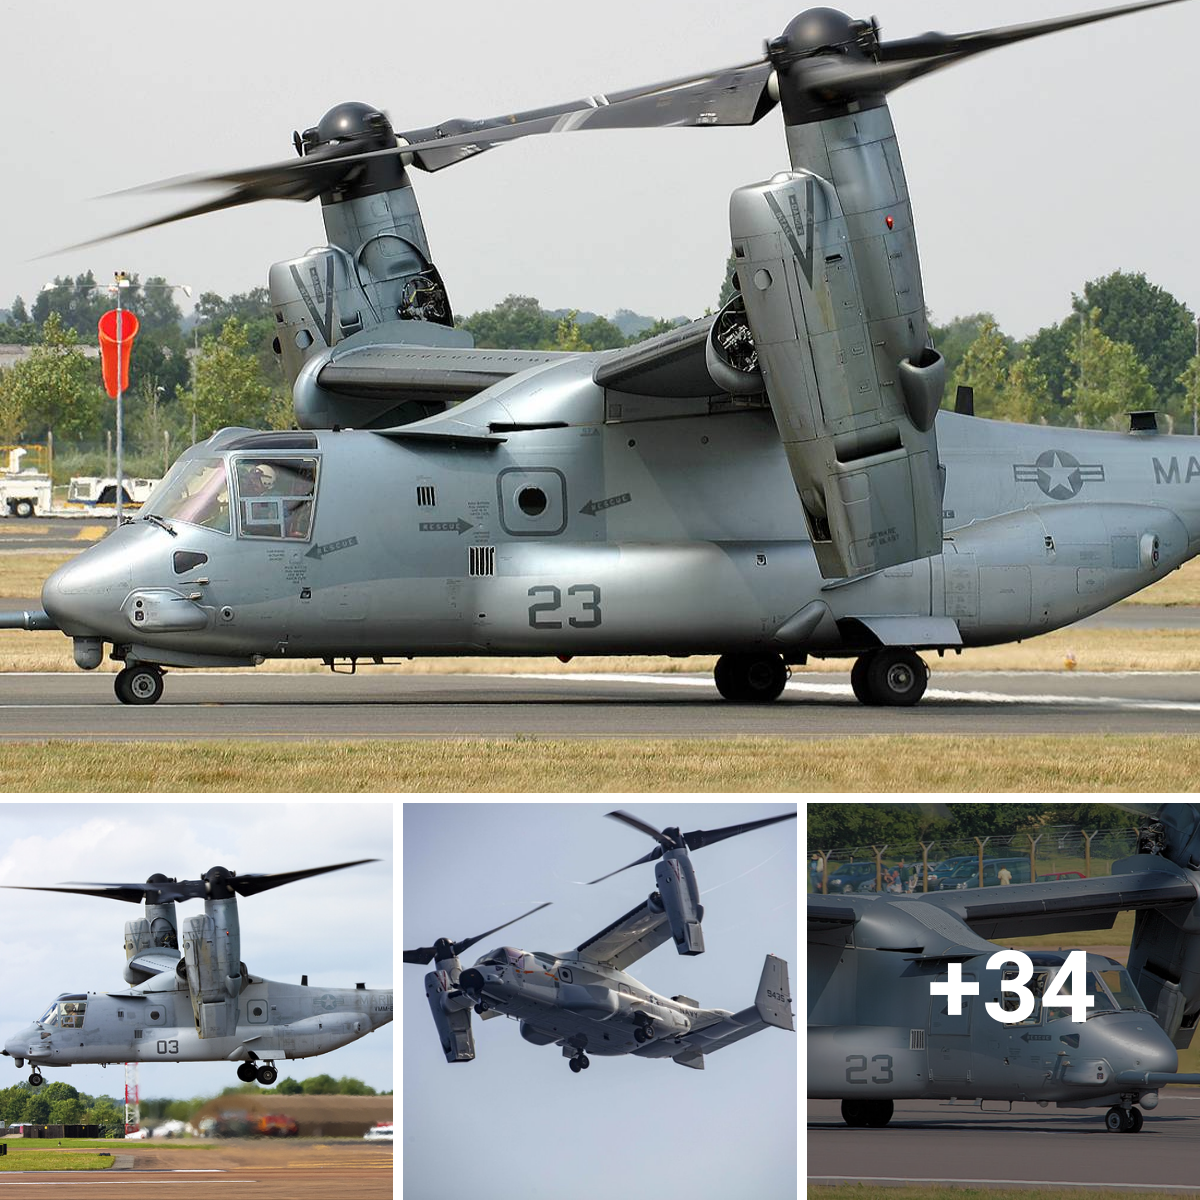 A Very Beautiful Aircraft: The Bell Boeing V-22 Osprey